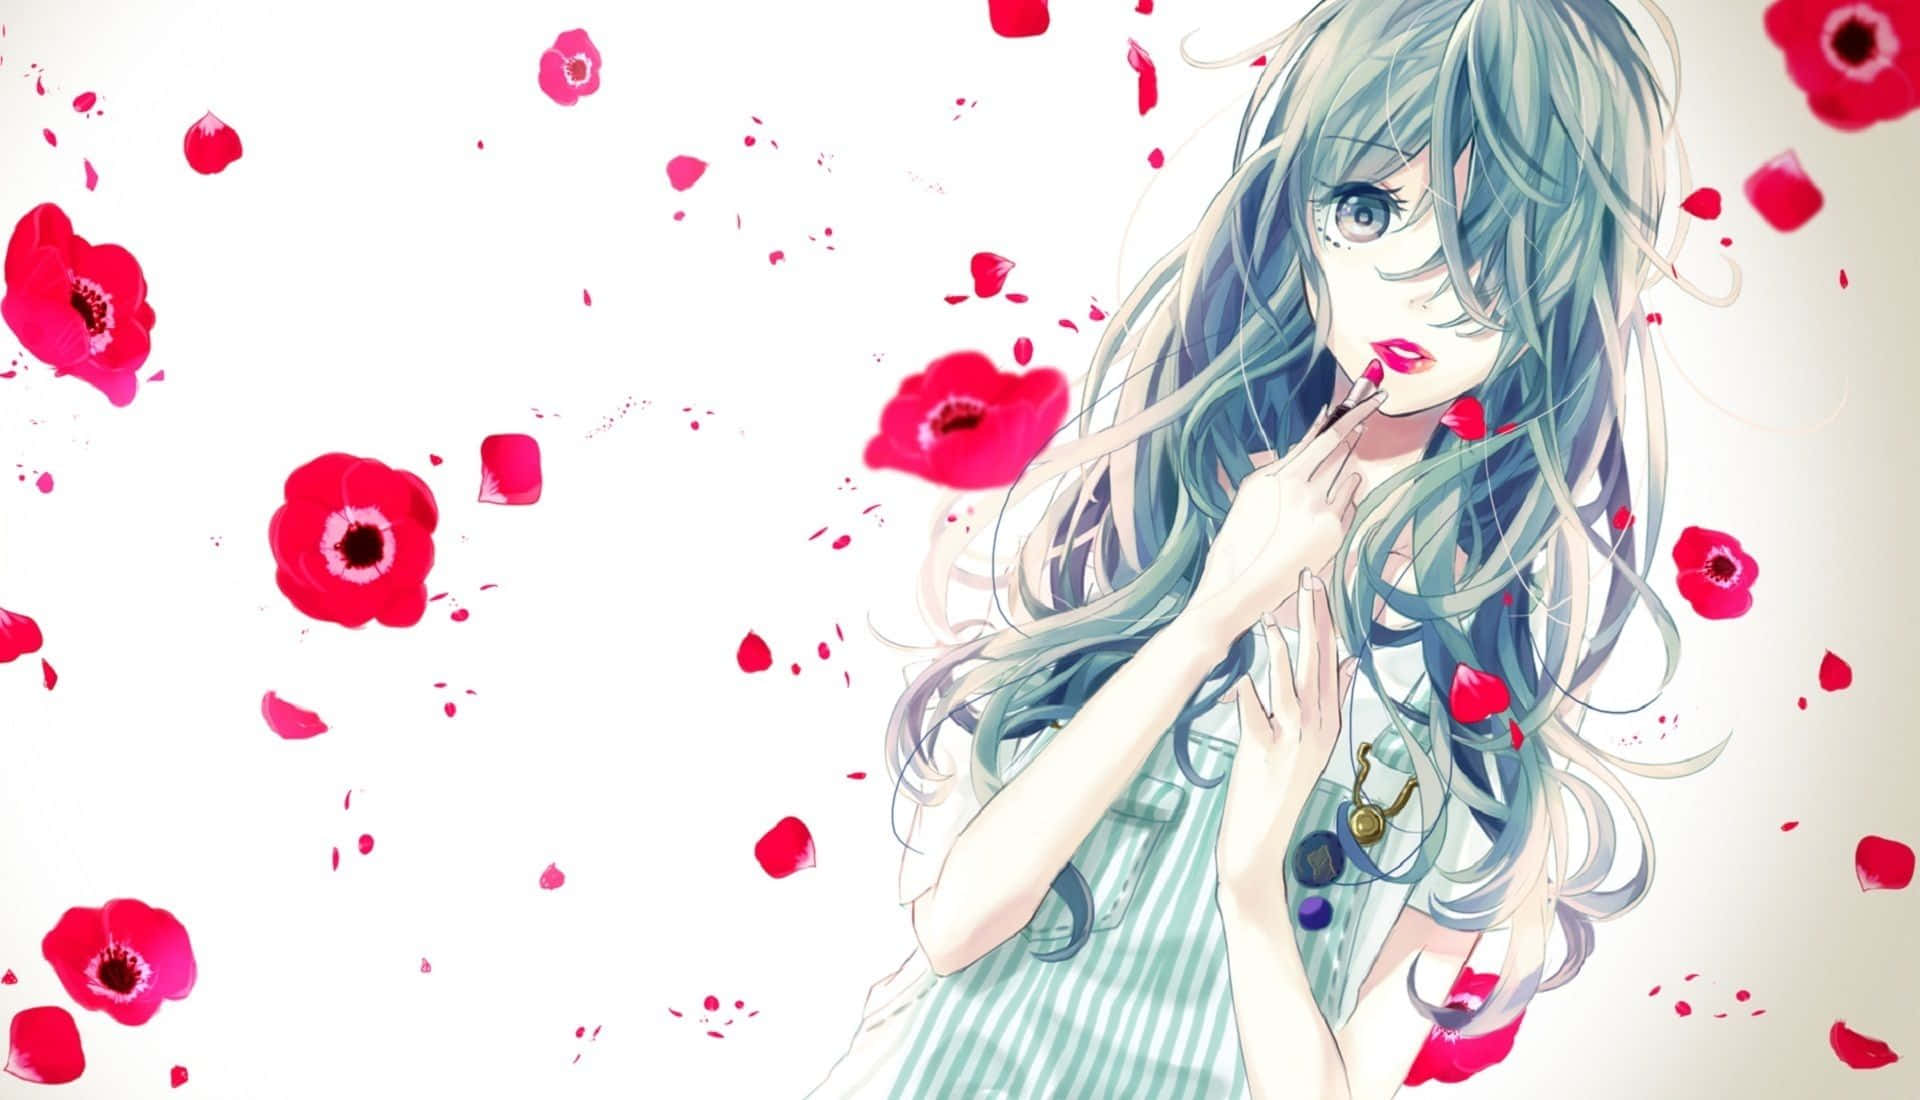 Cute Background Anime Girl With Poppy Flowers